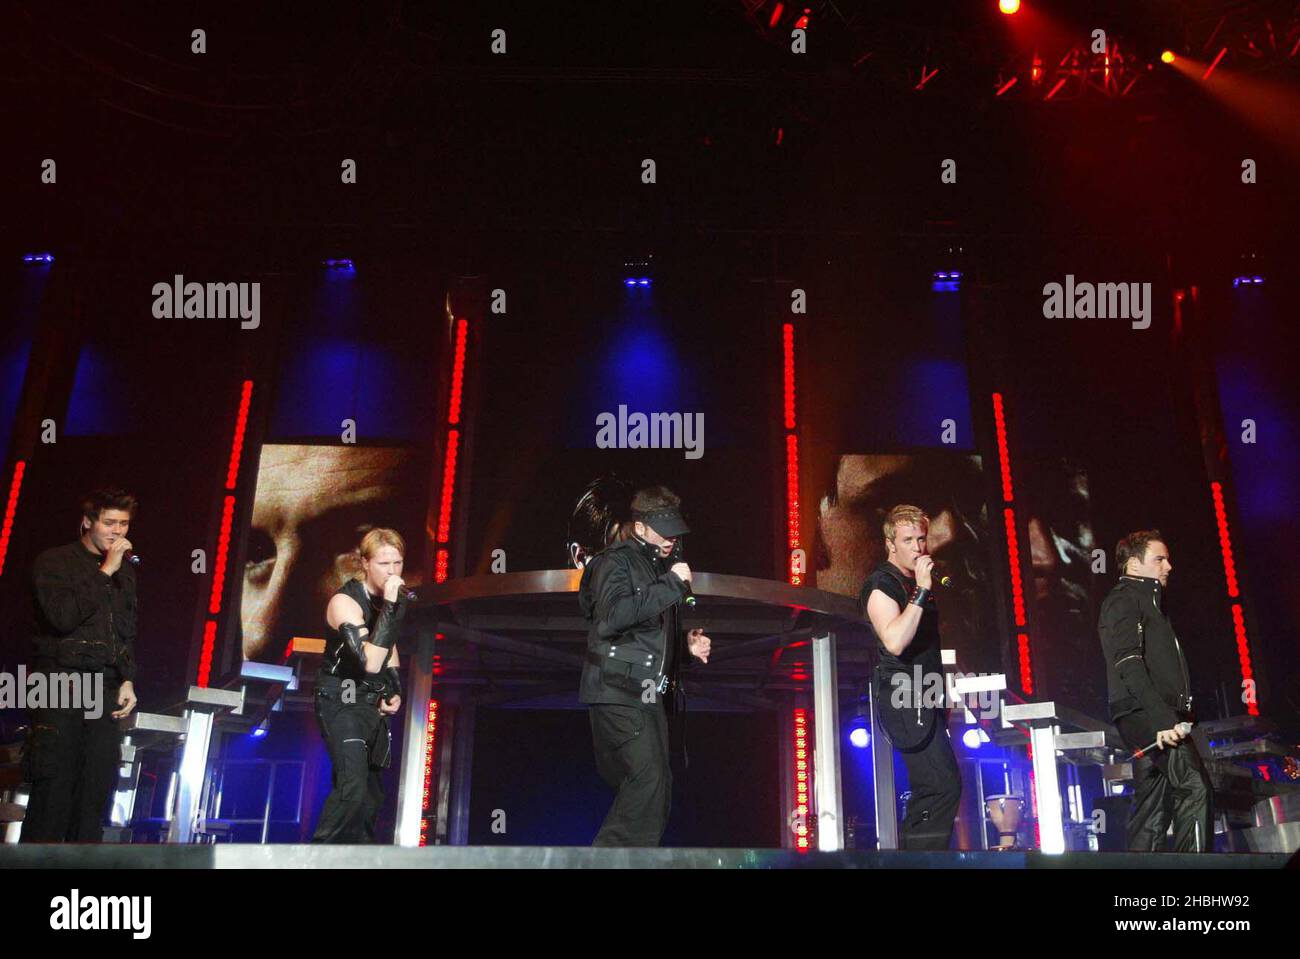 Westlife perform live at the London Arena. Full length. Stock Photo